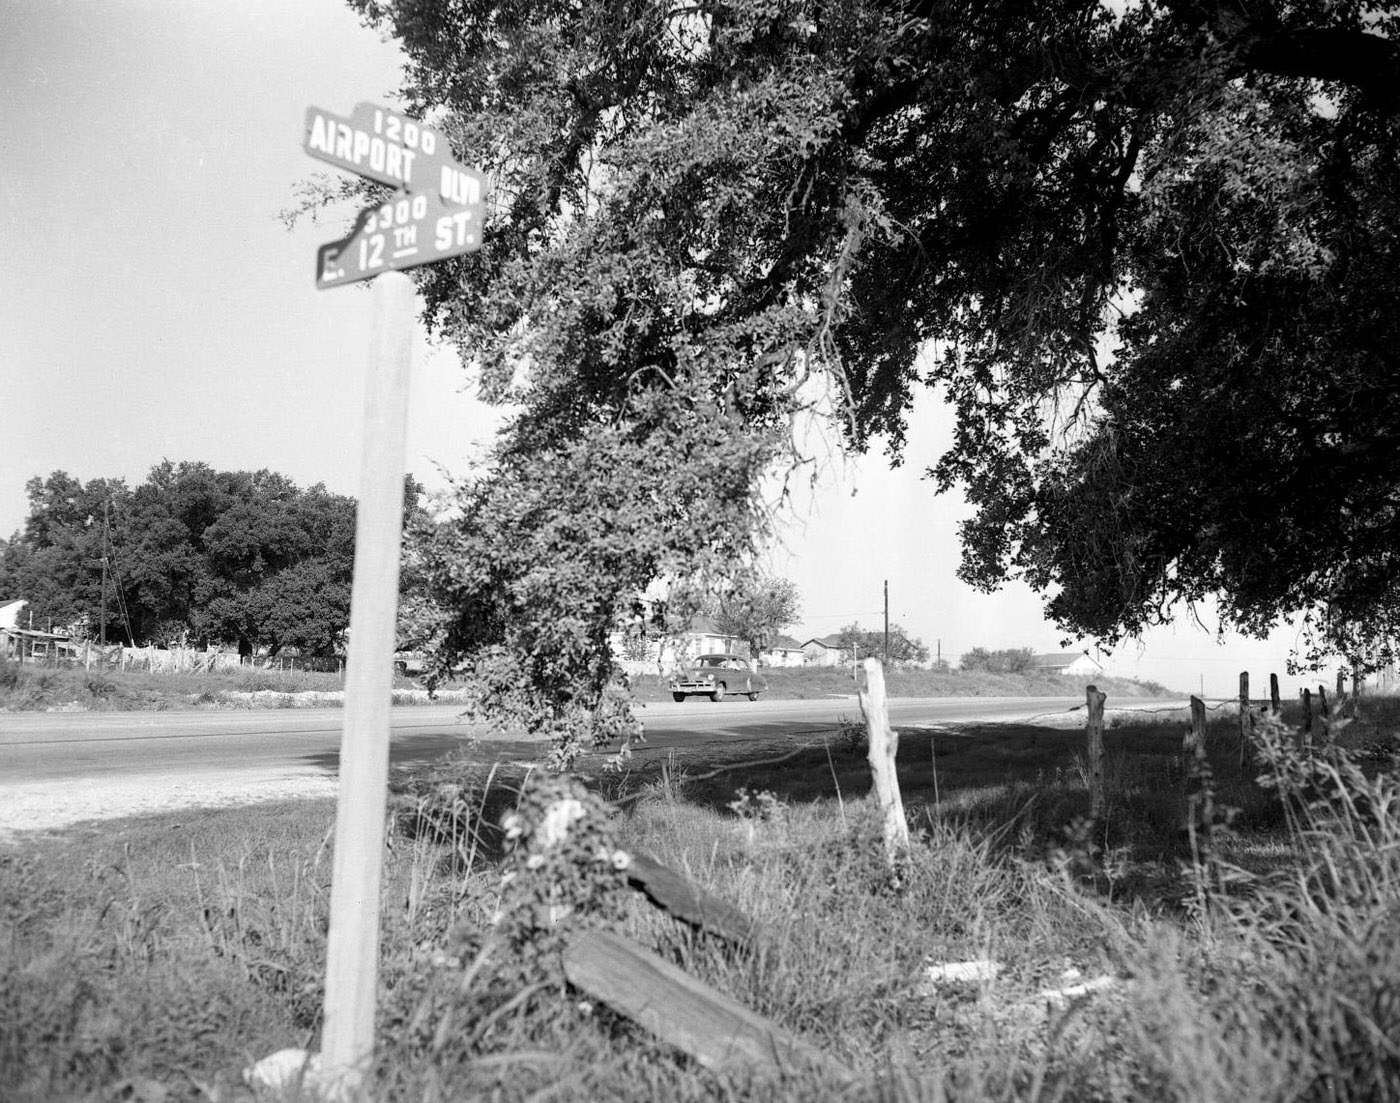 Intersection of Airport Blvd and E. 12th St from Roadside, 1951.